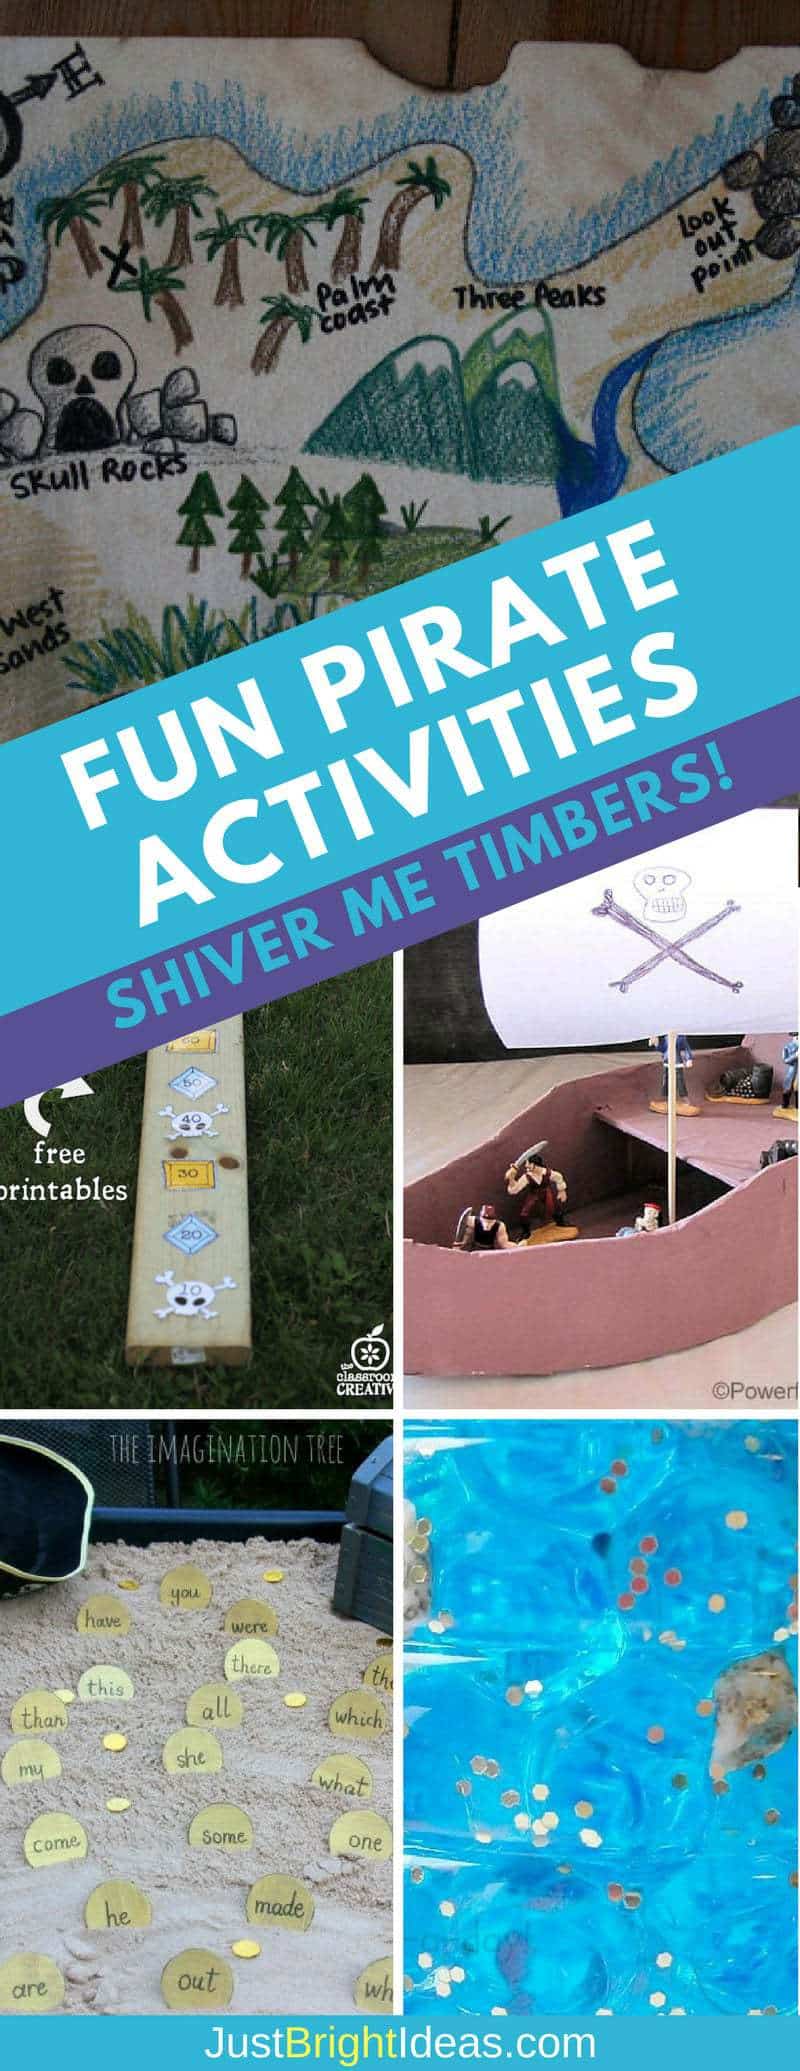 Pirate activities for kids